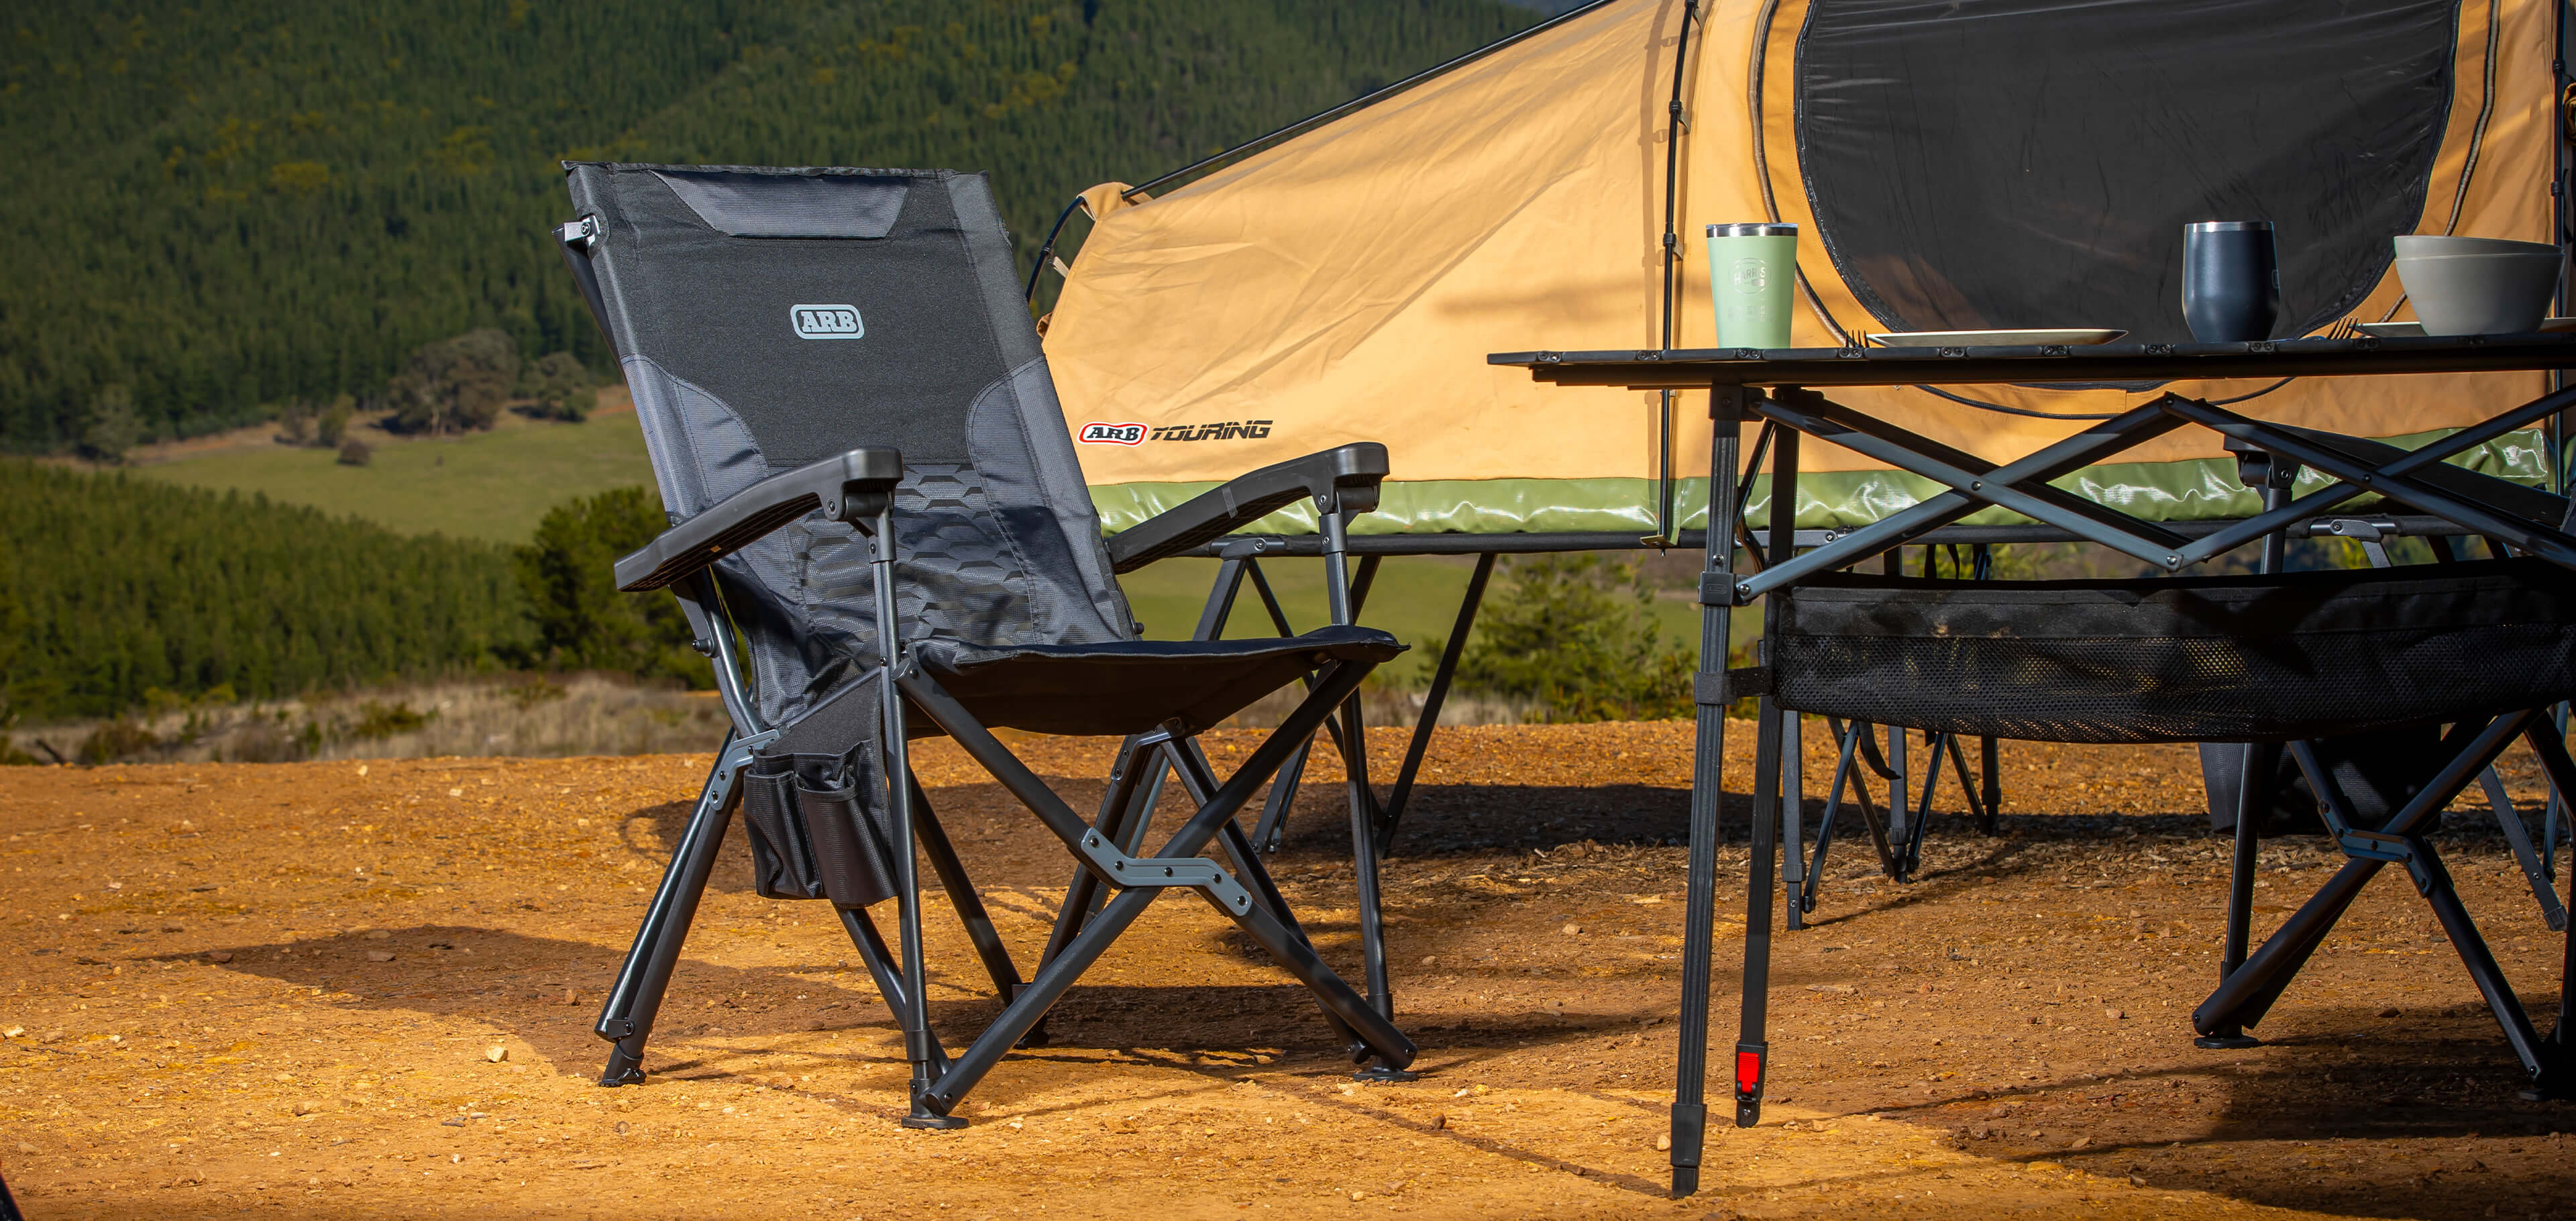 10 Best Camping Tables for 2020 - Portable and Folding Camping Tables